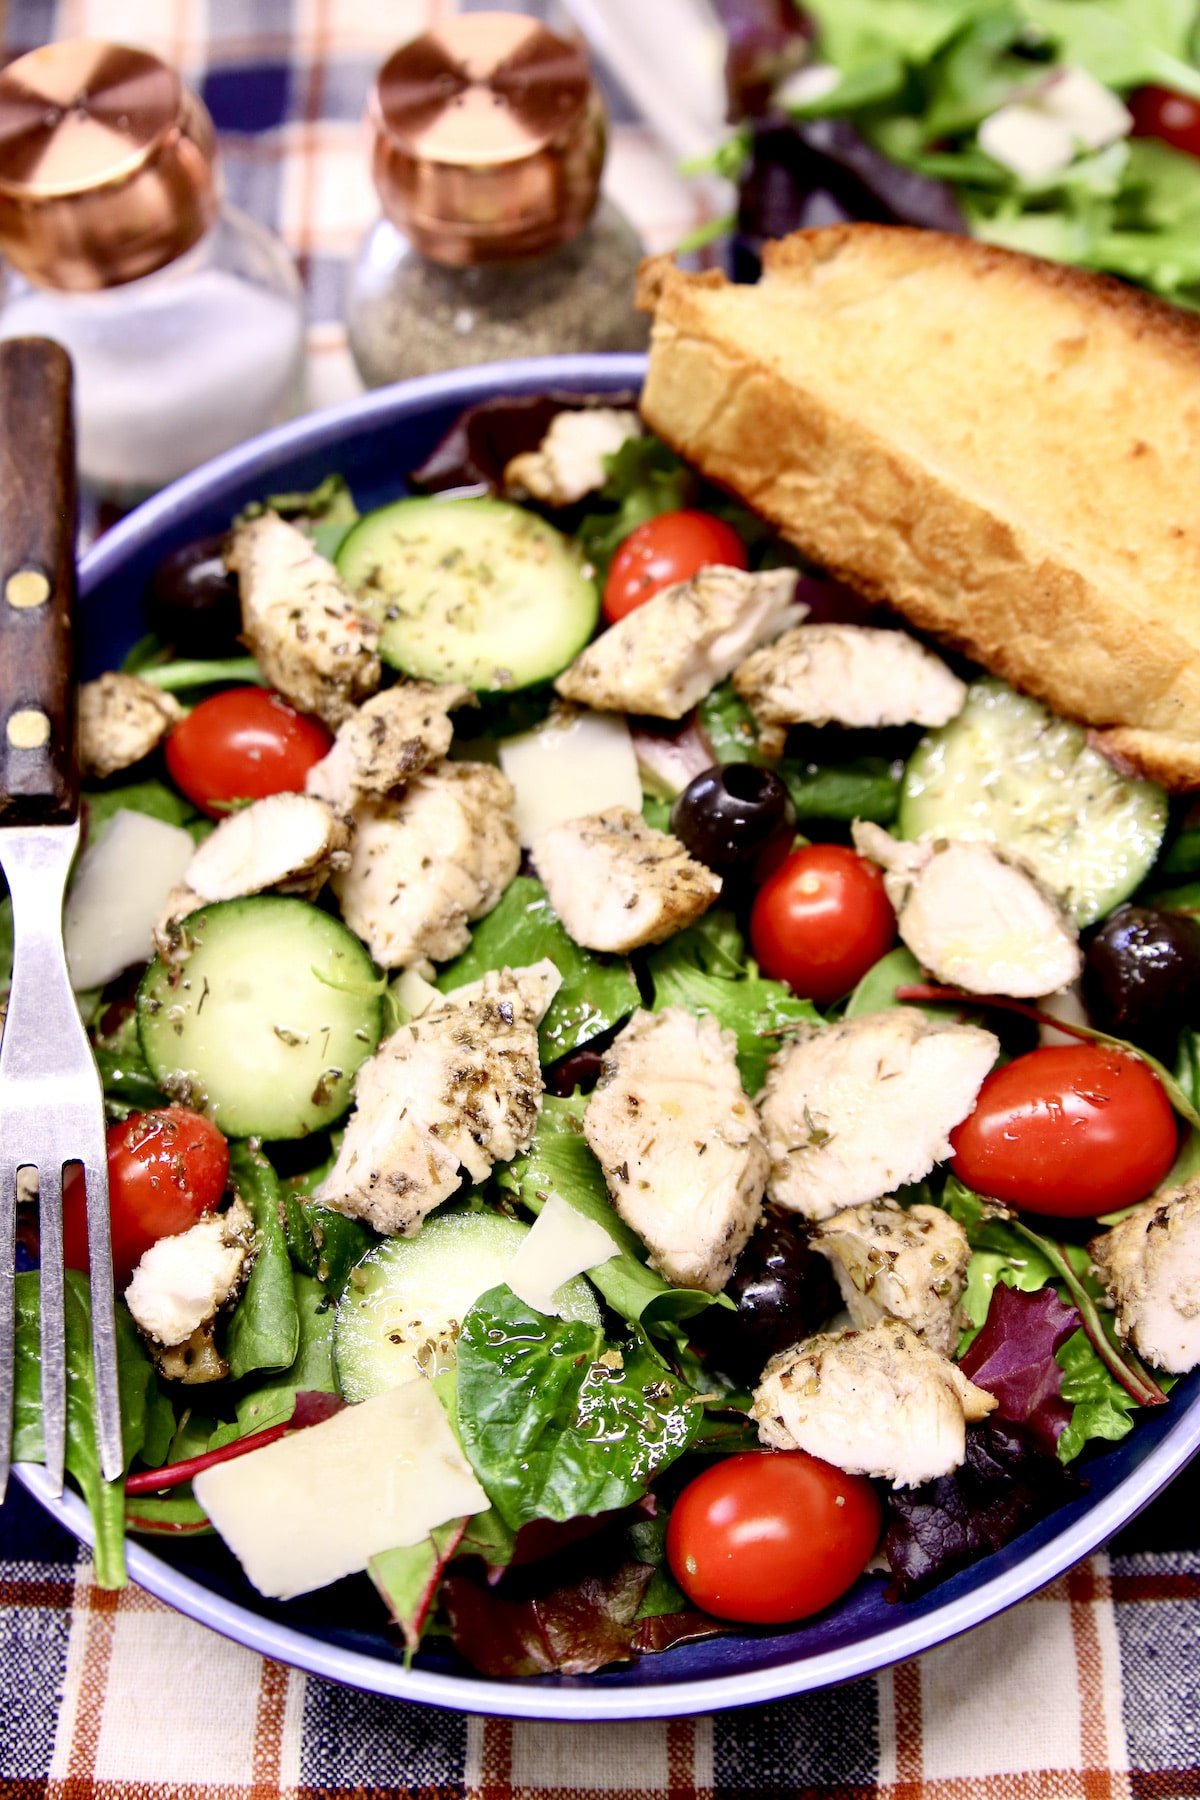 Bowl of grilled chicken salad and garlic bread.